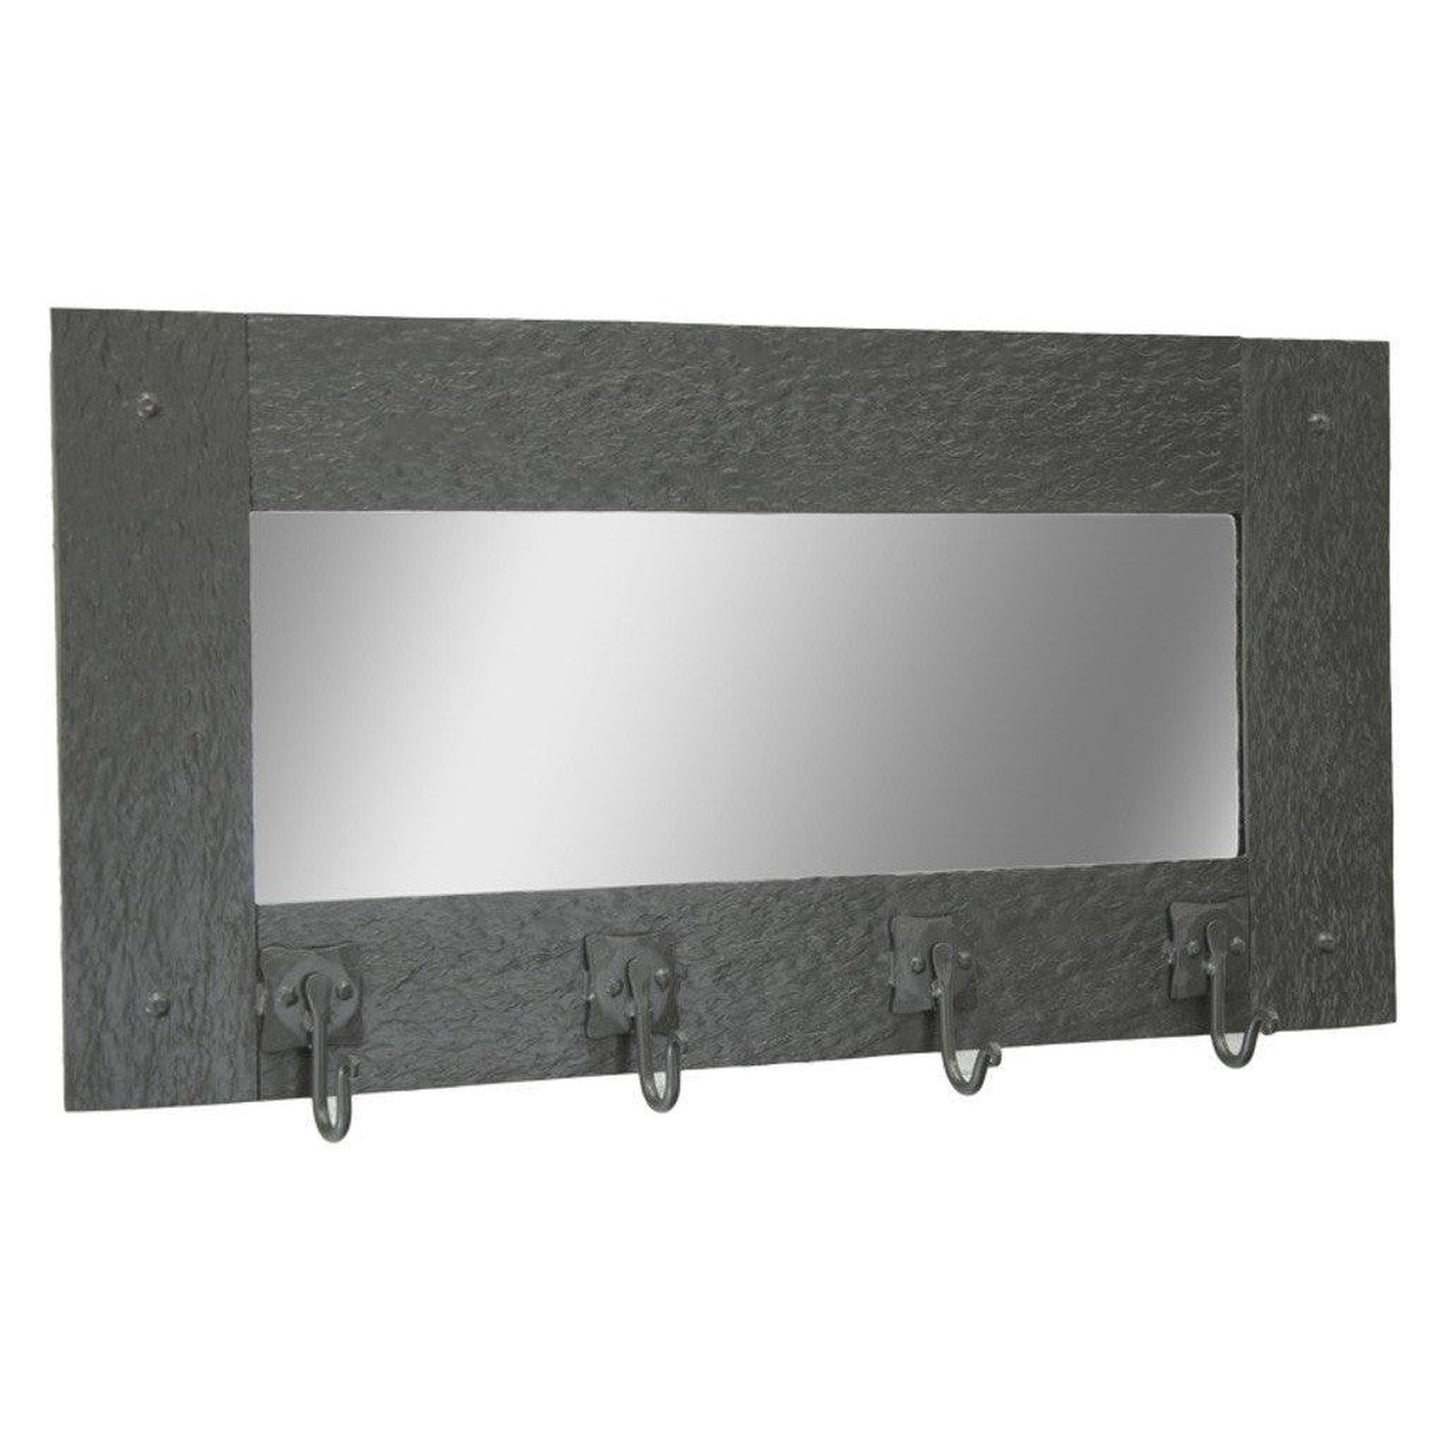 Stone County Ironworks Cedarvale 24" Small Burnished Gold Iron Wall Mirror Coat Rack With Copper Iron Accent and 4 Hooks